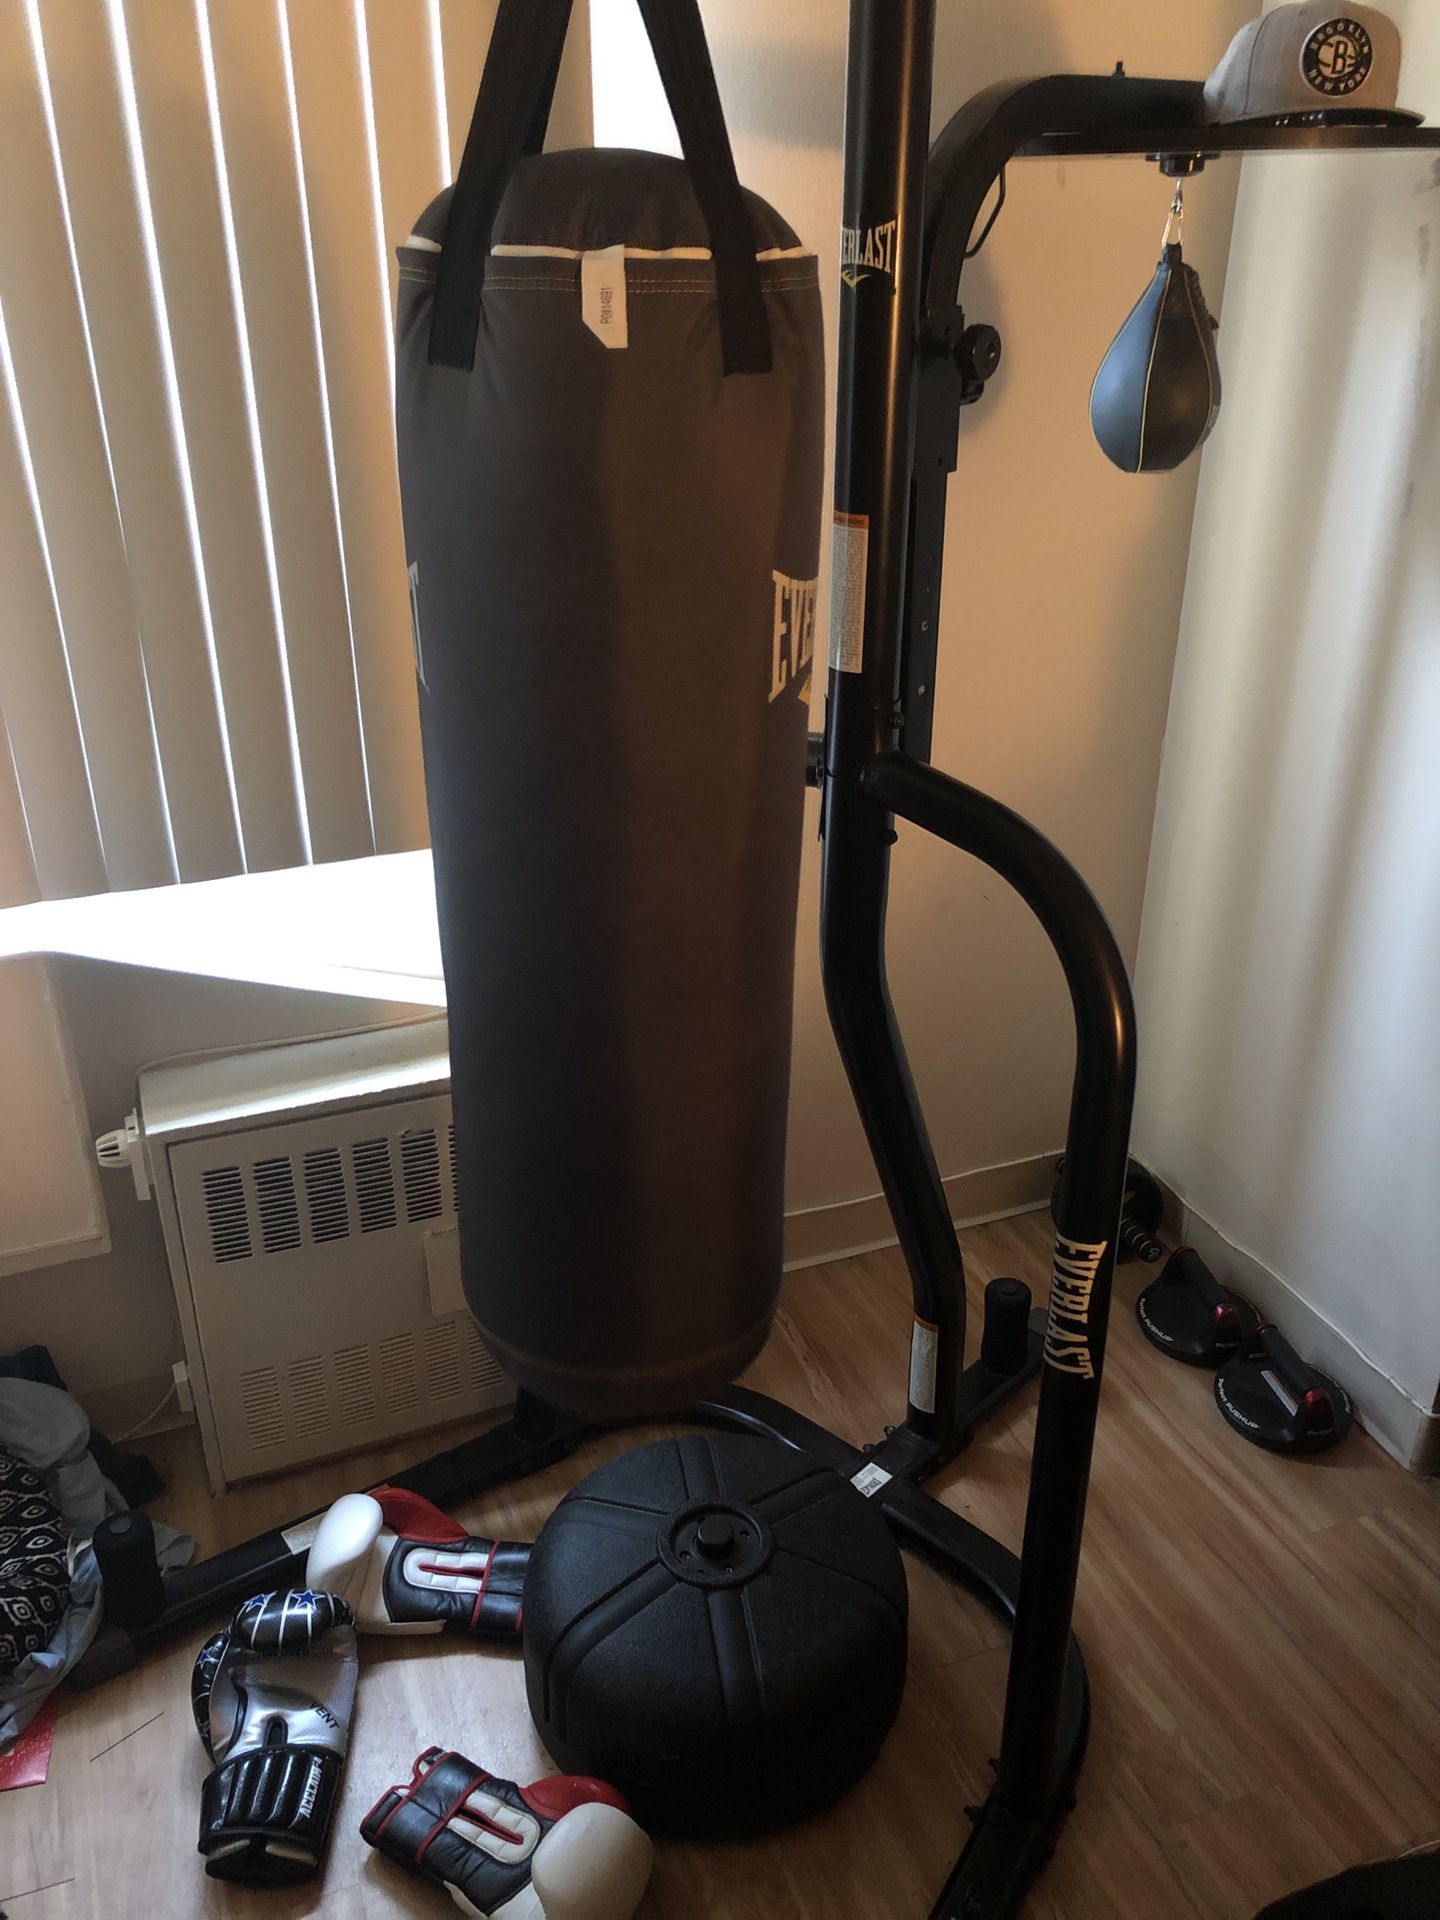 Heavy bag speed bag and stand, bench and reflex bag and stand